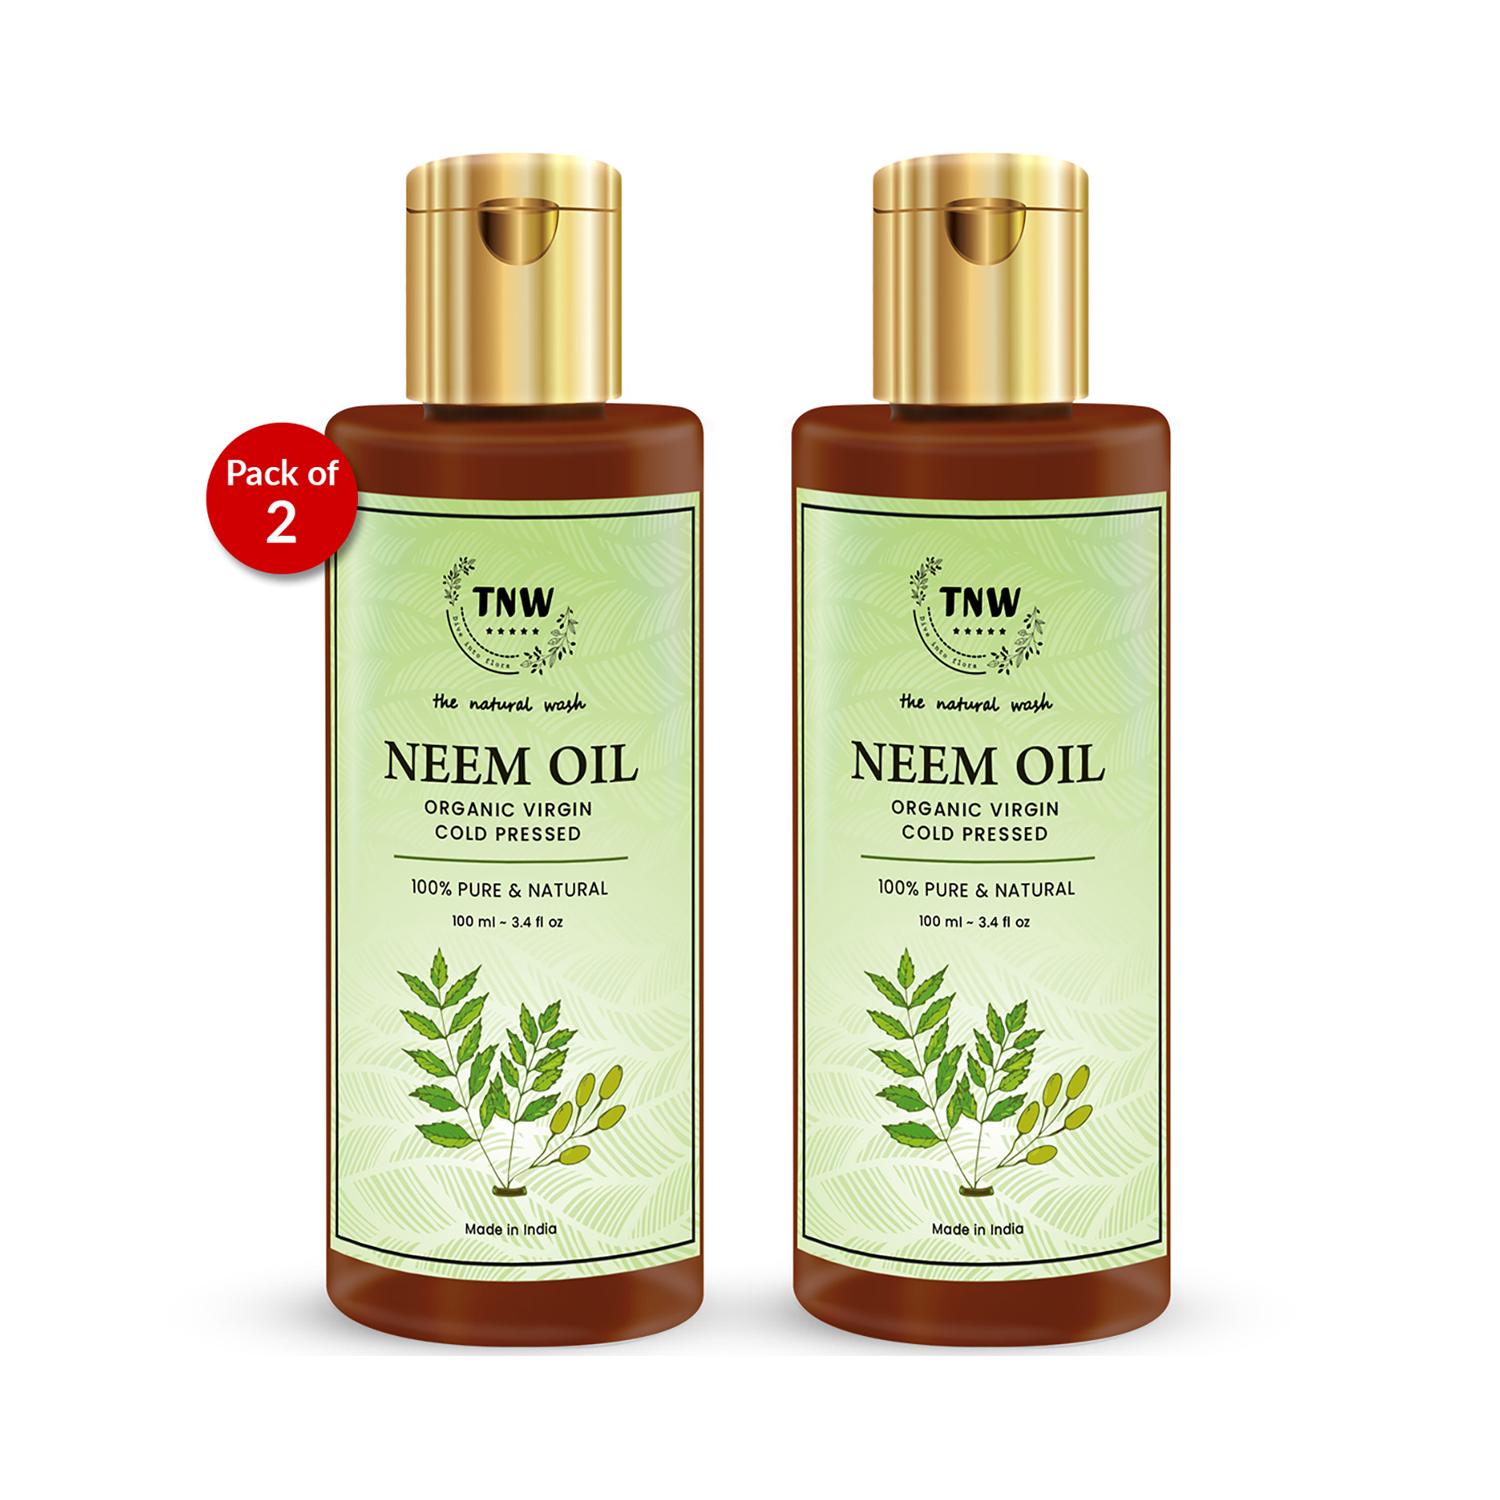 TNW The Natural Wash | TNW - The Natural Wash Neem Oil Pack of 2 Combo